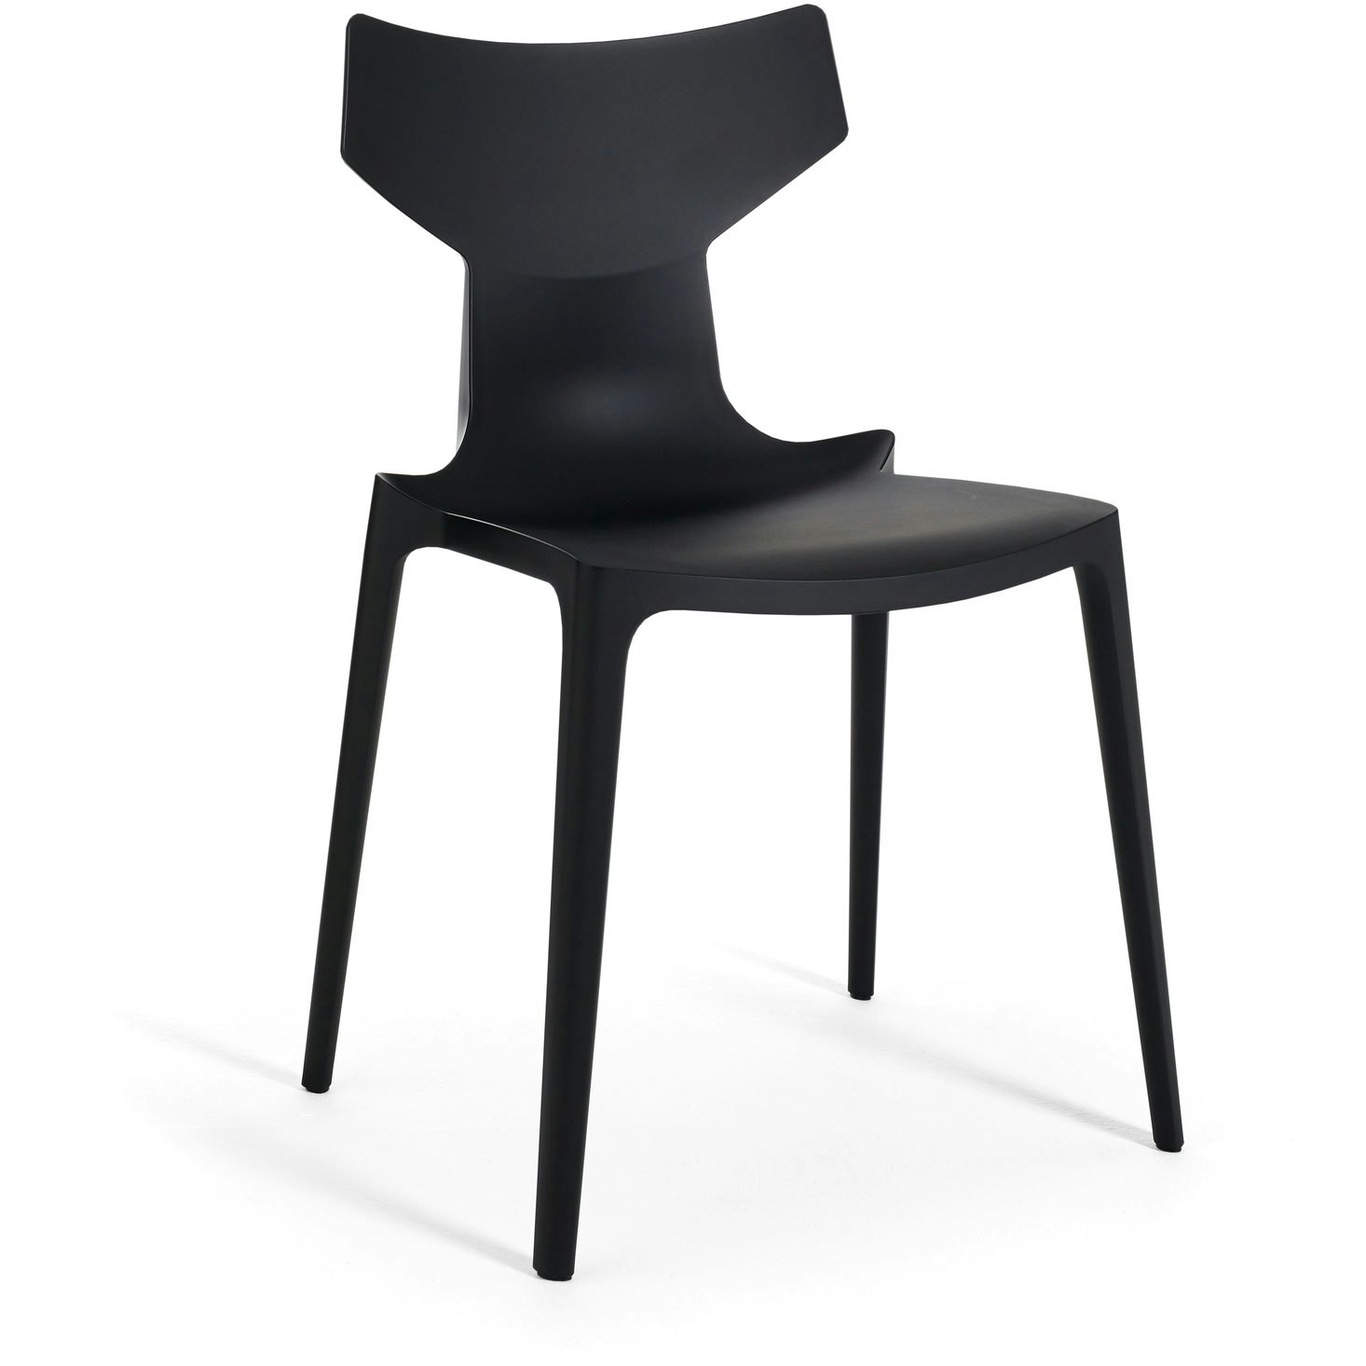 Re-Chair Stol by Illy, Matsort